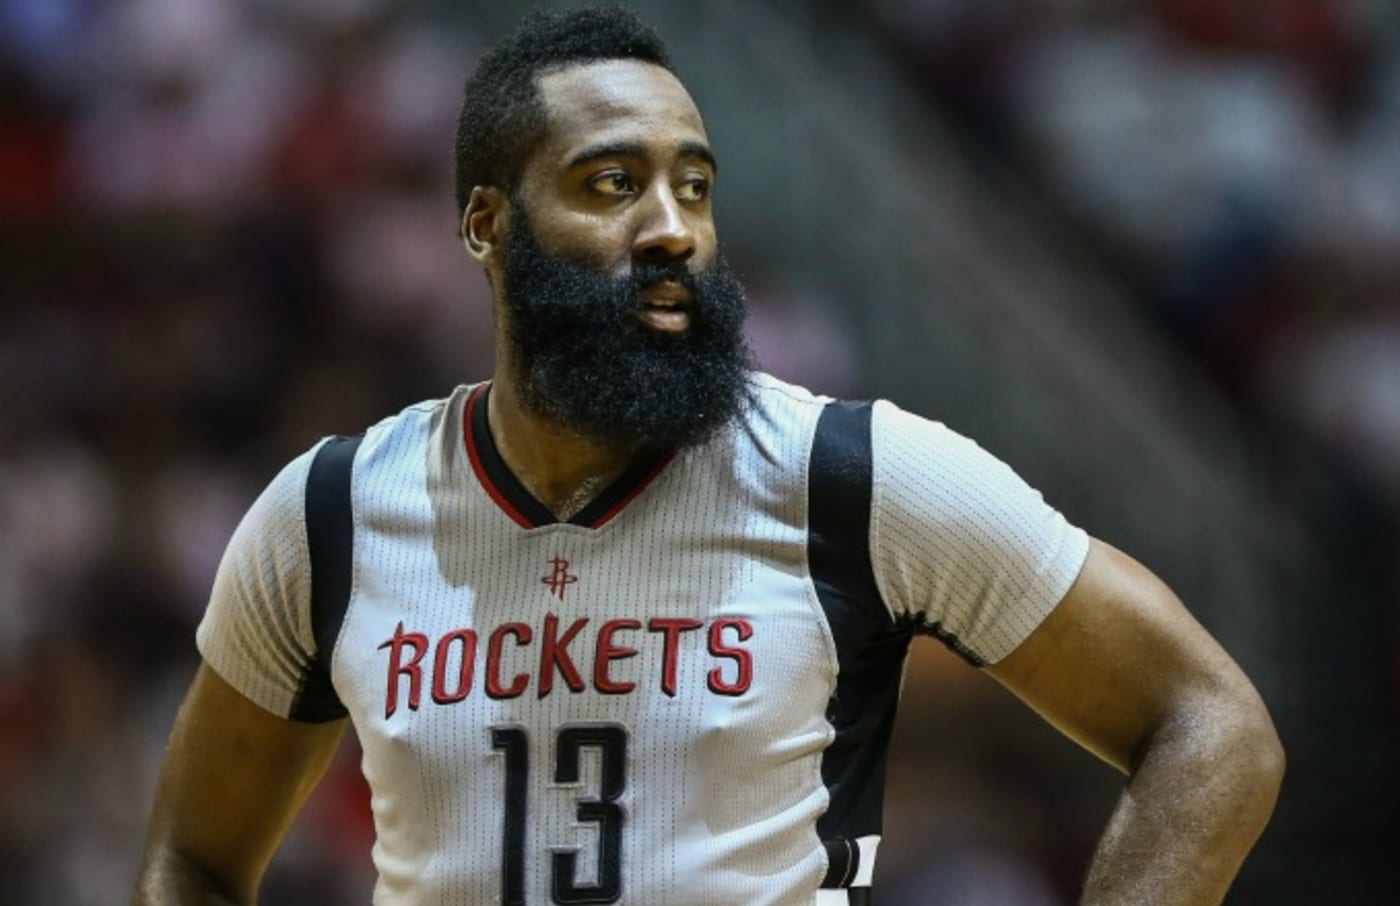 James Harden plays in a playoff game for the Rockets.